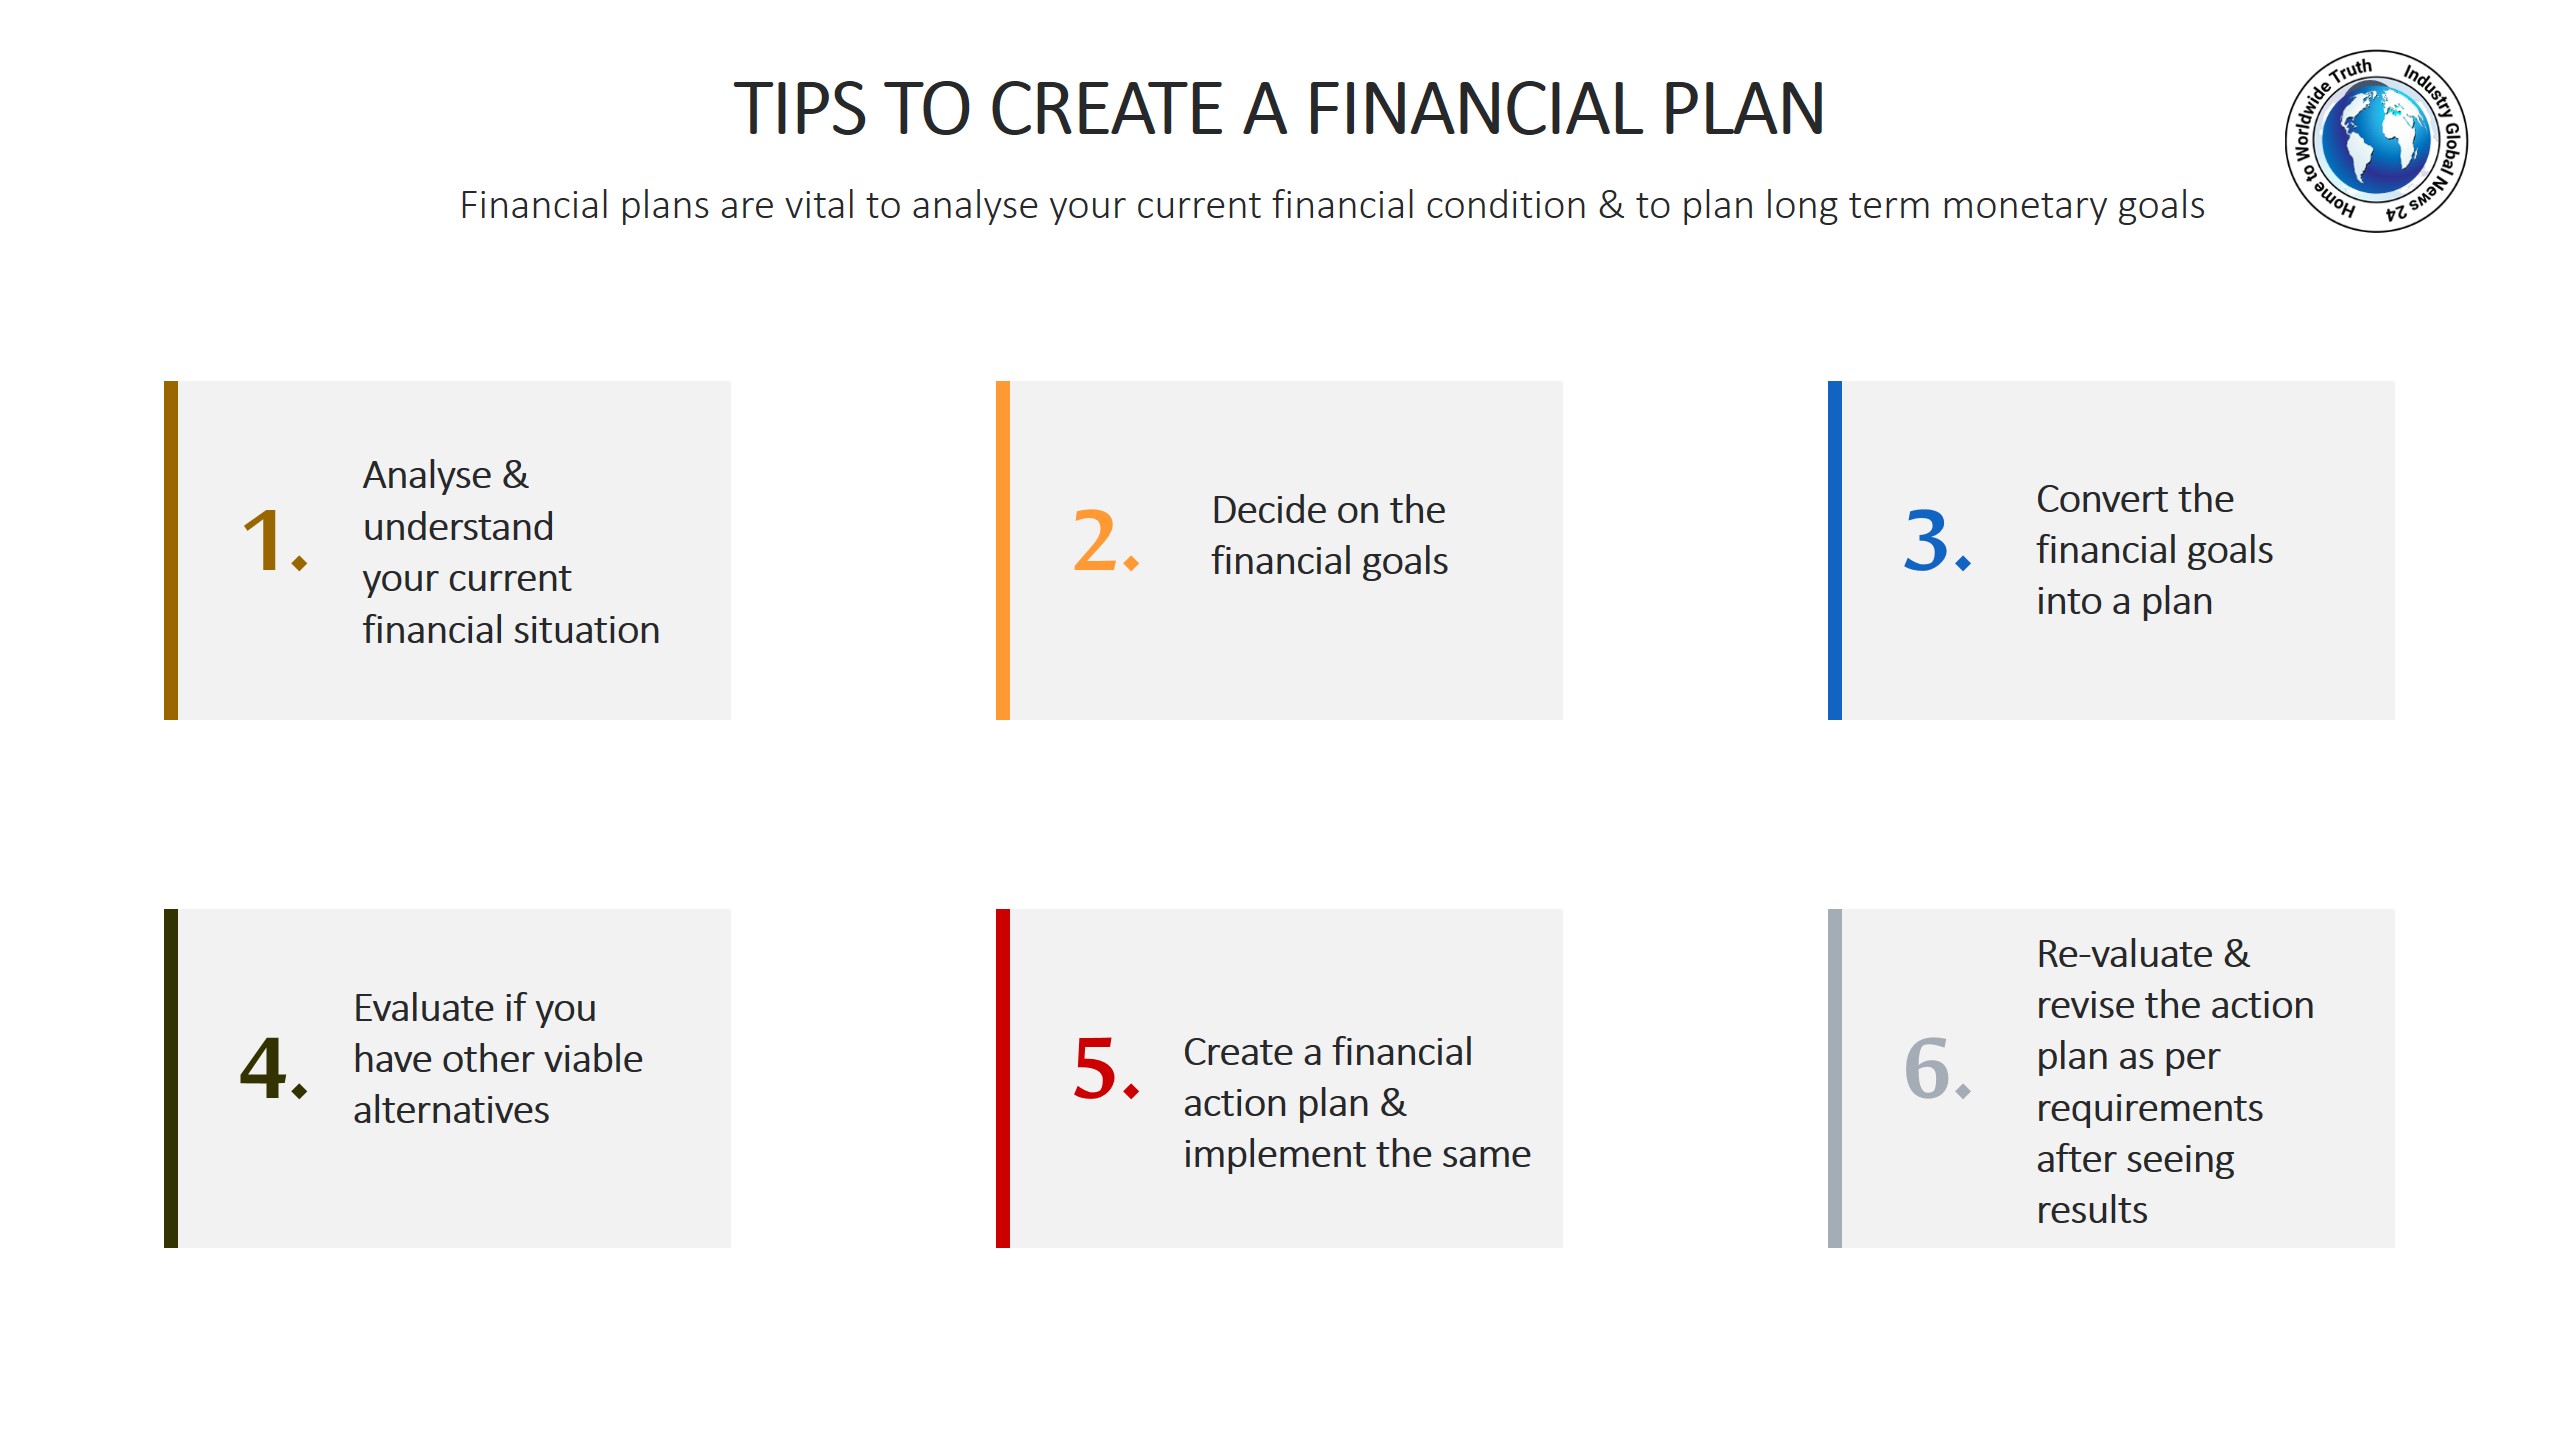 Tips to create a financial plan